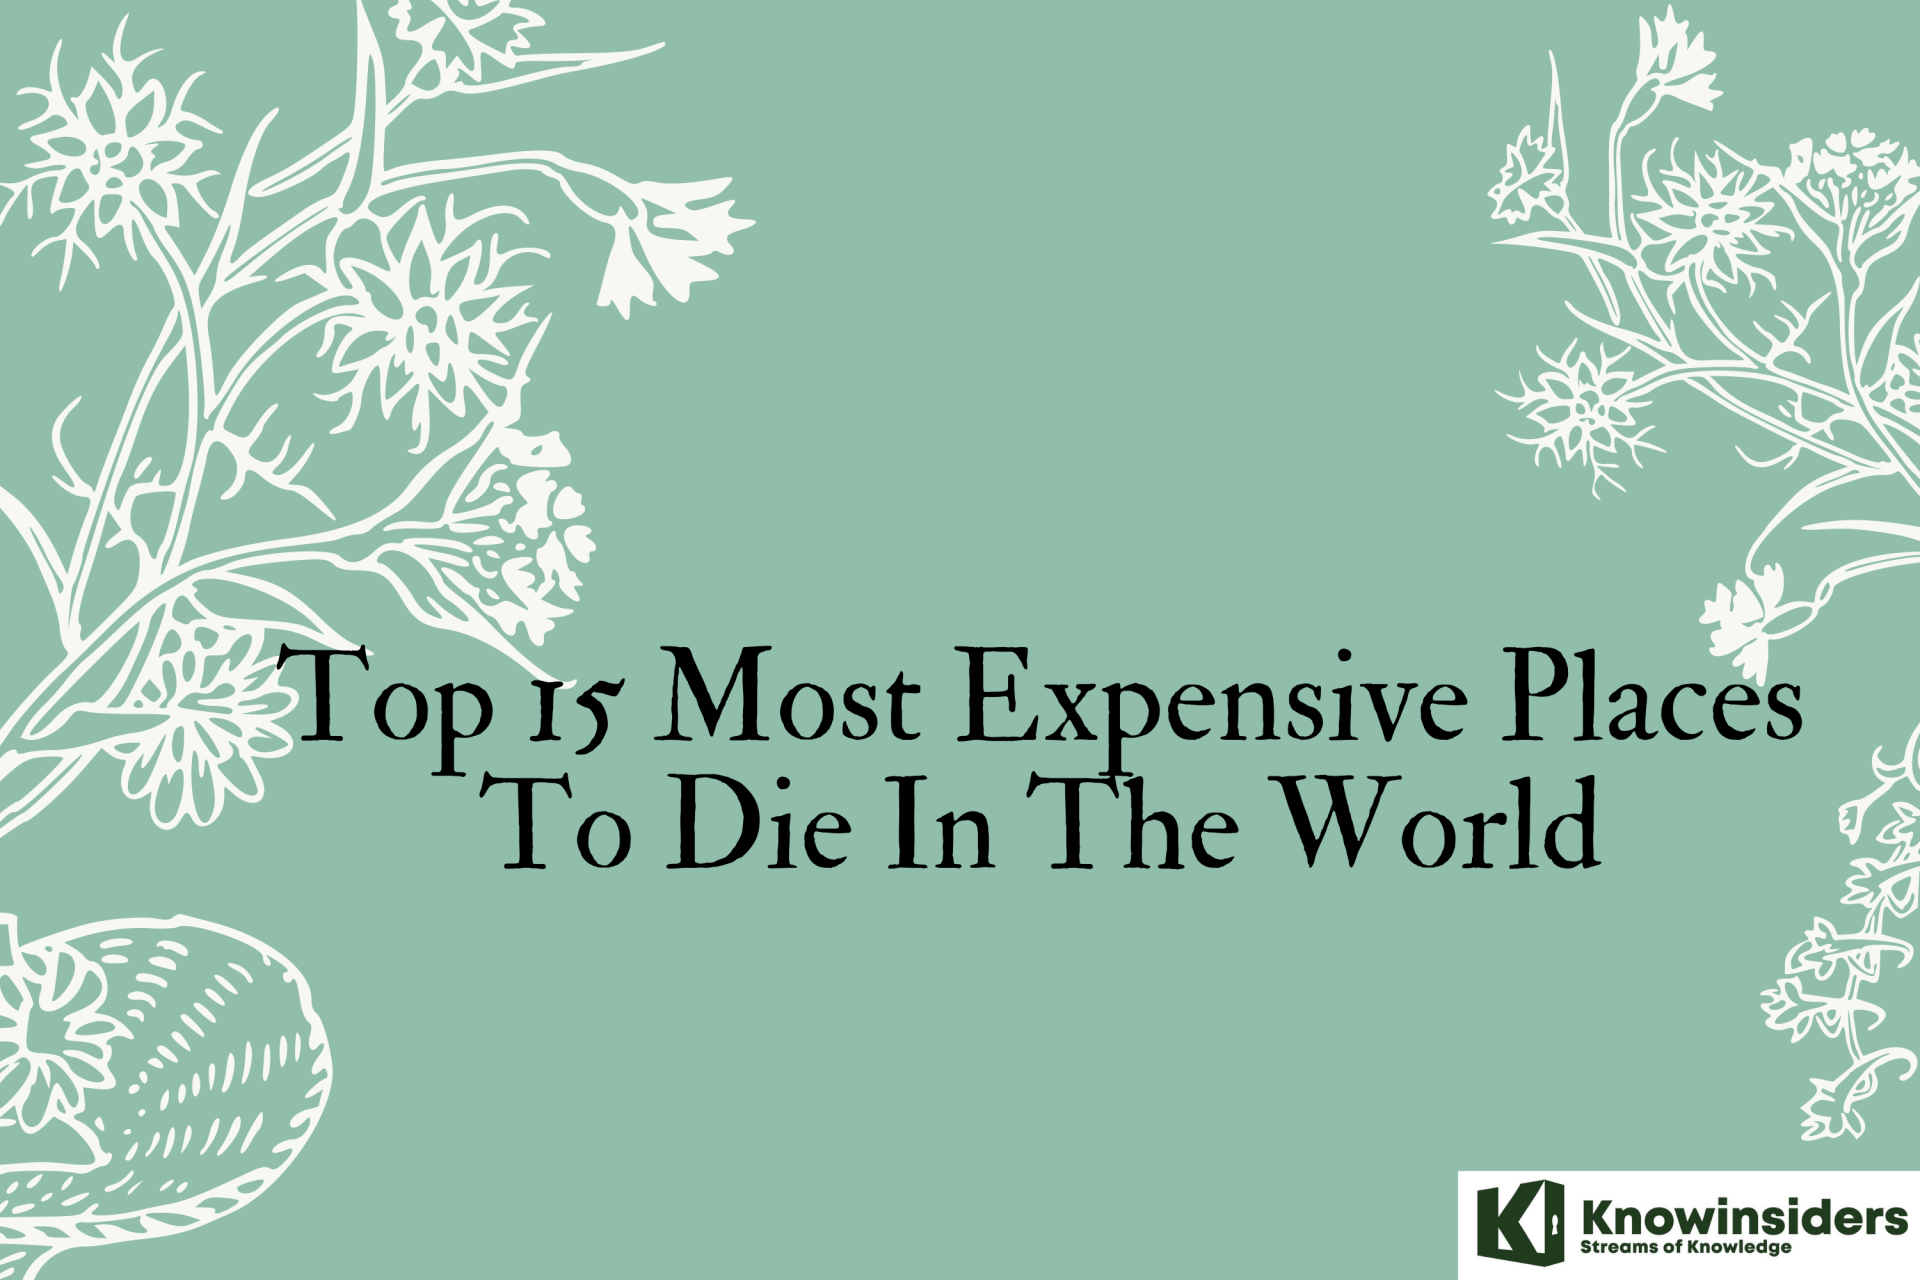 Top 15 Most Expensive Places To Die In The World